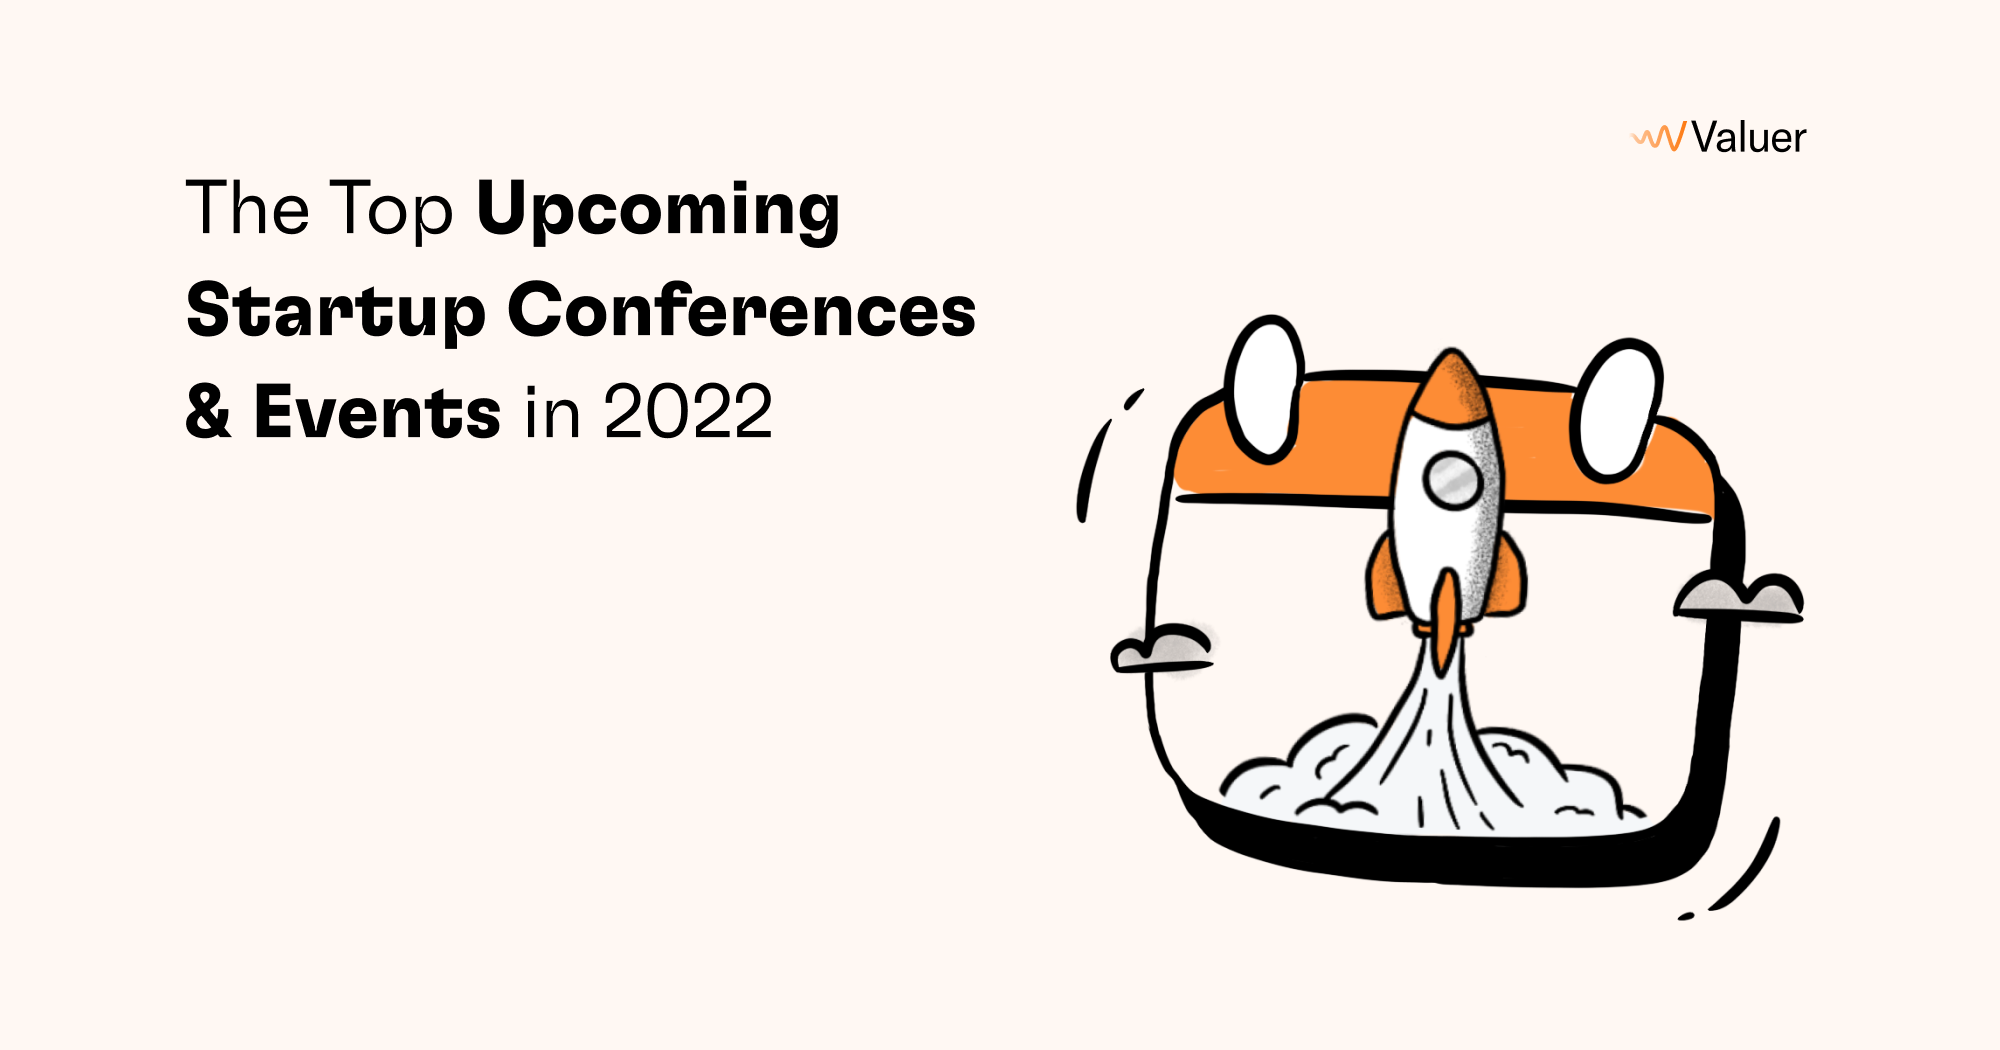 The Top Upcoming Startup Conferences & Events in 2022